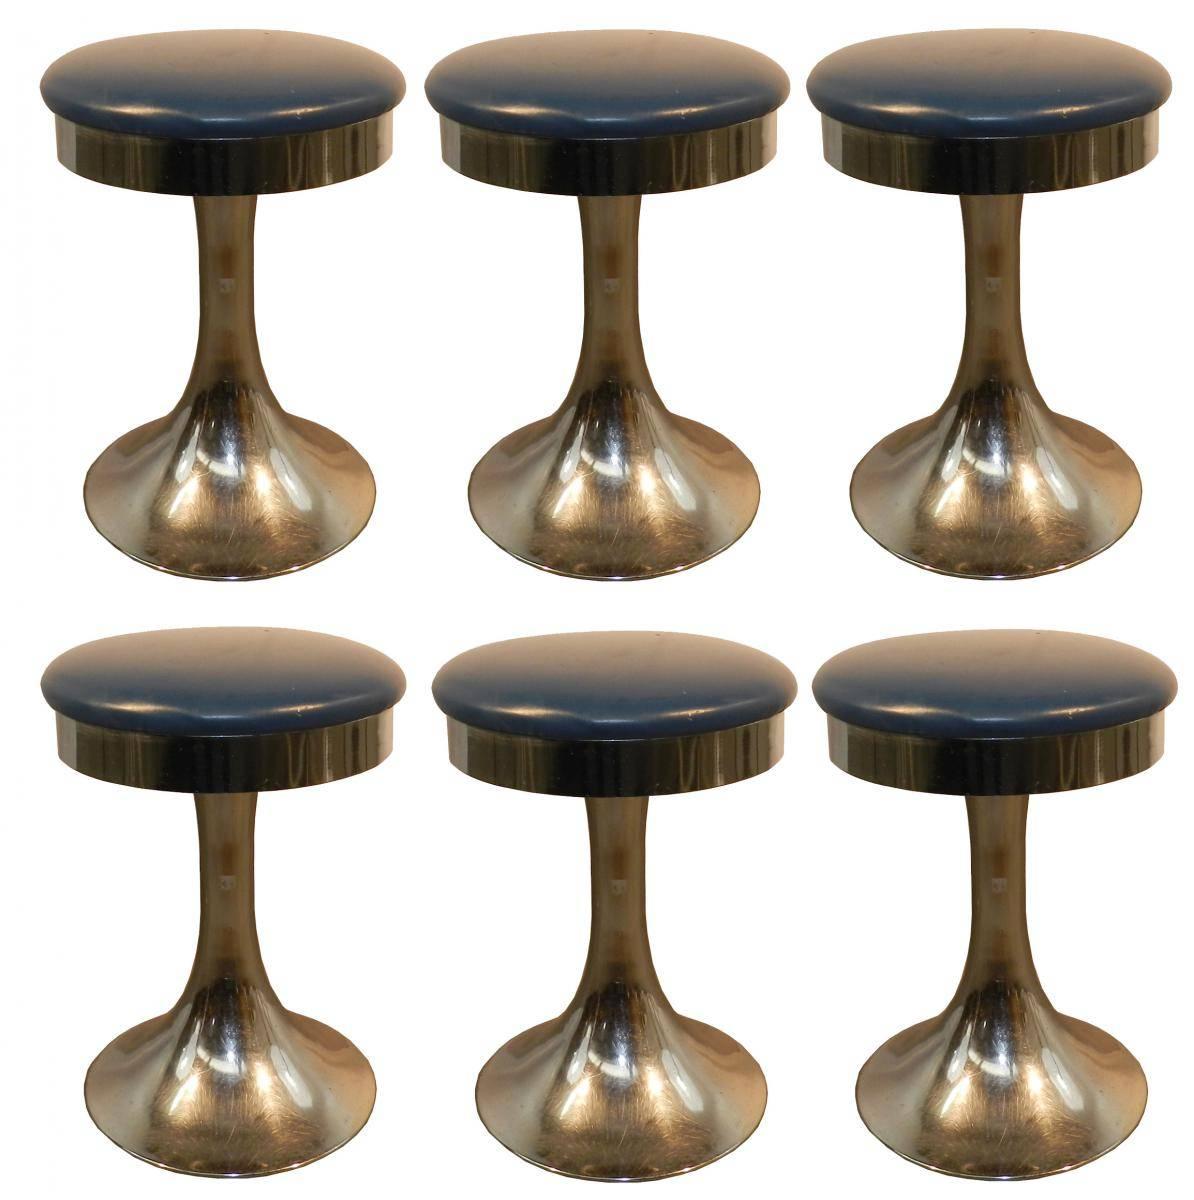 Set of Six Stools in Chrome and Faux Leather, USA, circa 1960-1970